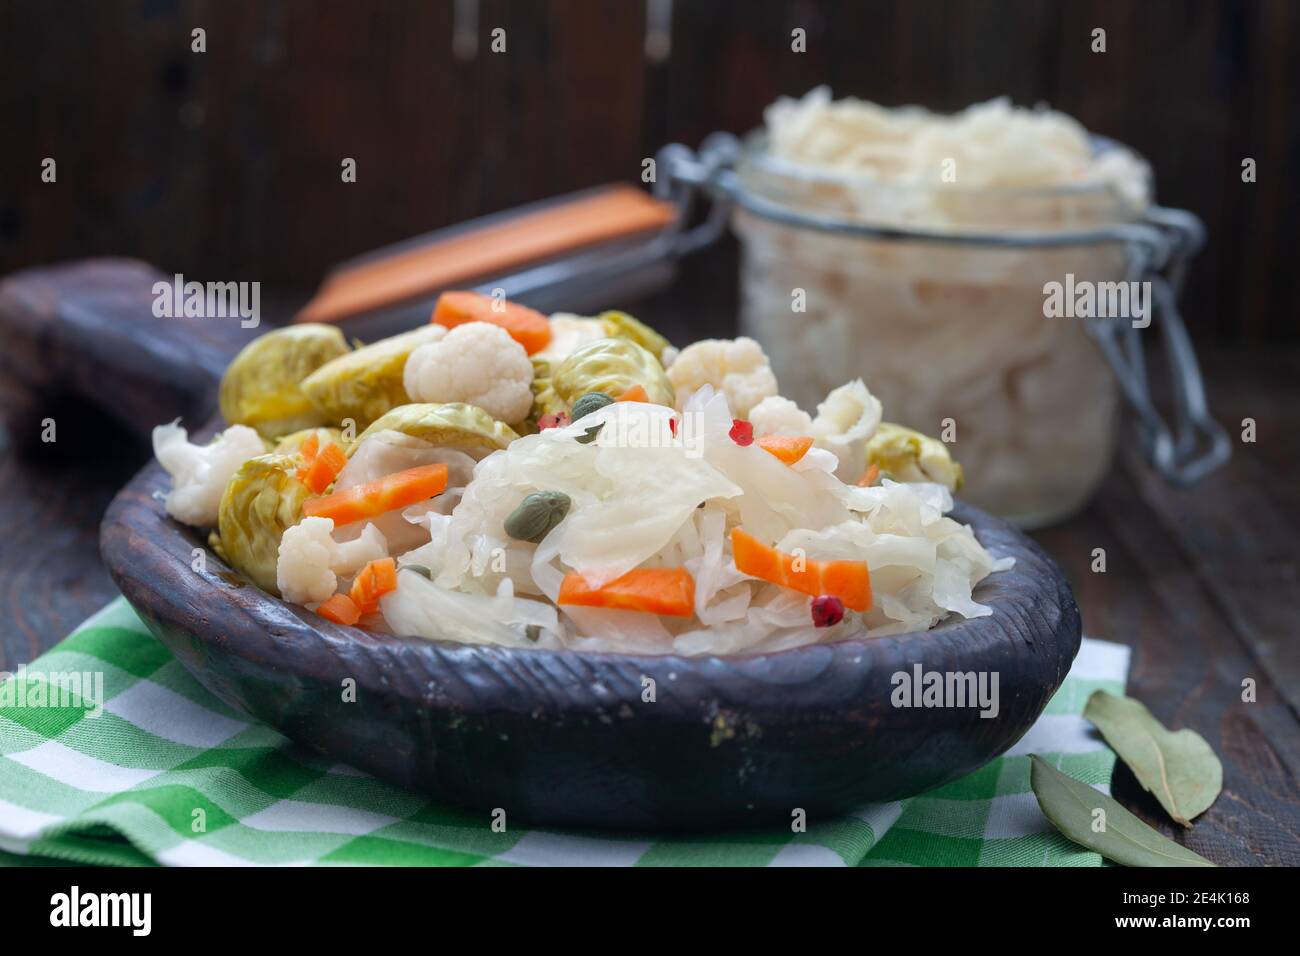 Homemade vegetables and sauerkraut pickling in rustic wooden plate. Healthy probiotic food full of vitamins. Stock Photo